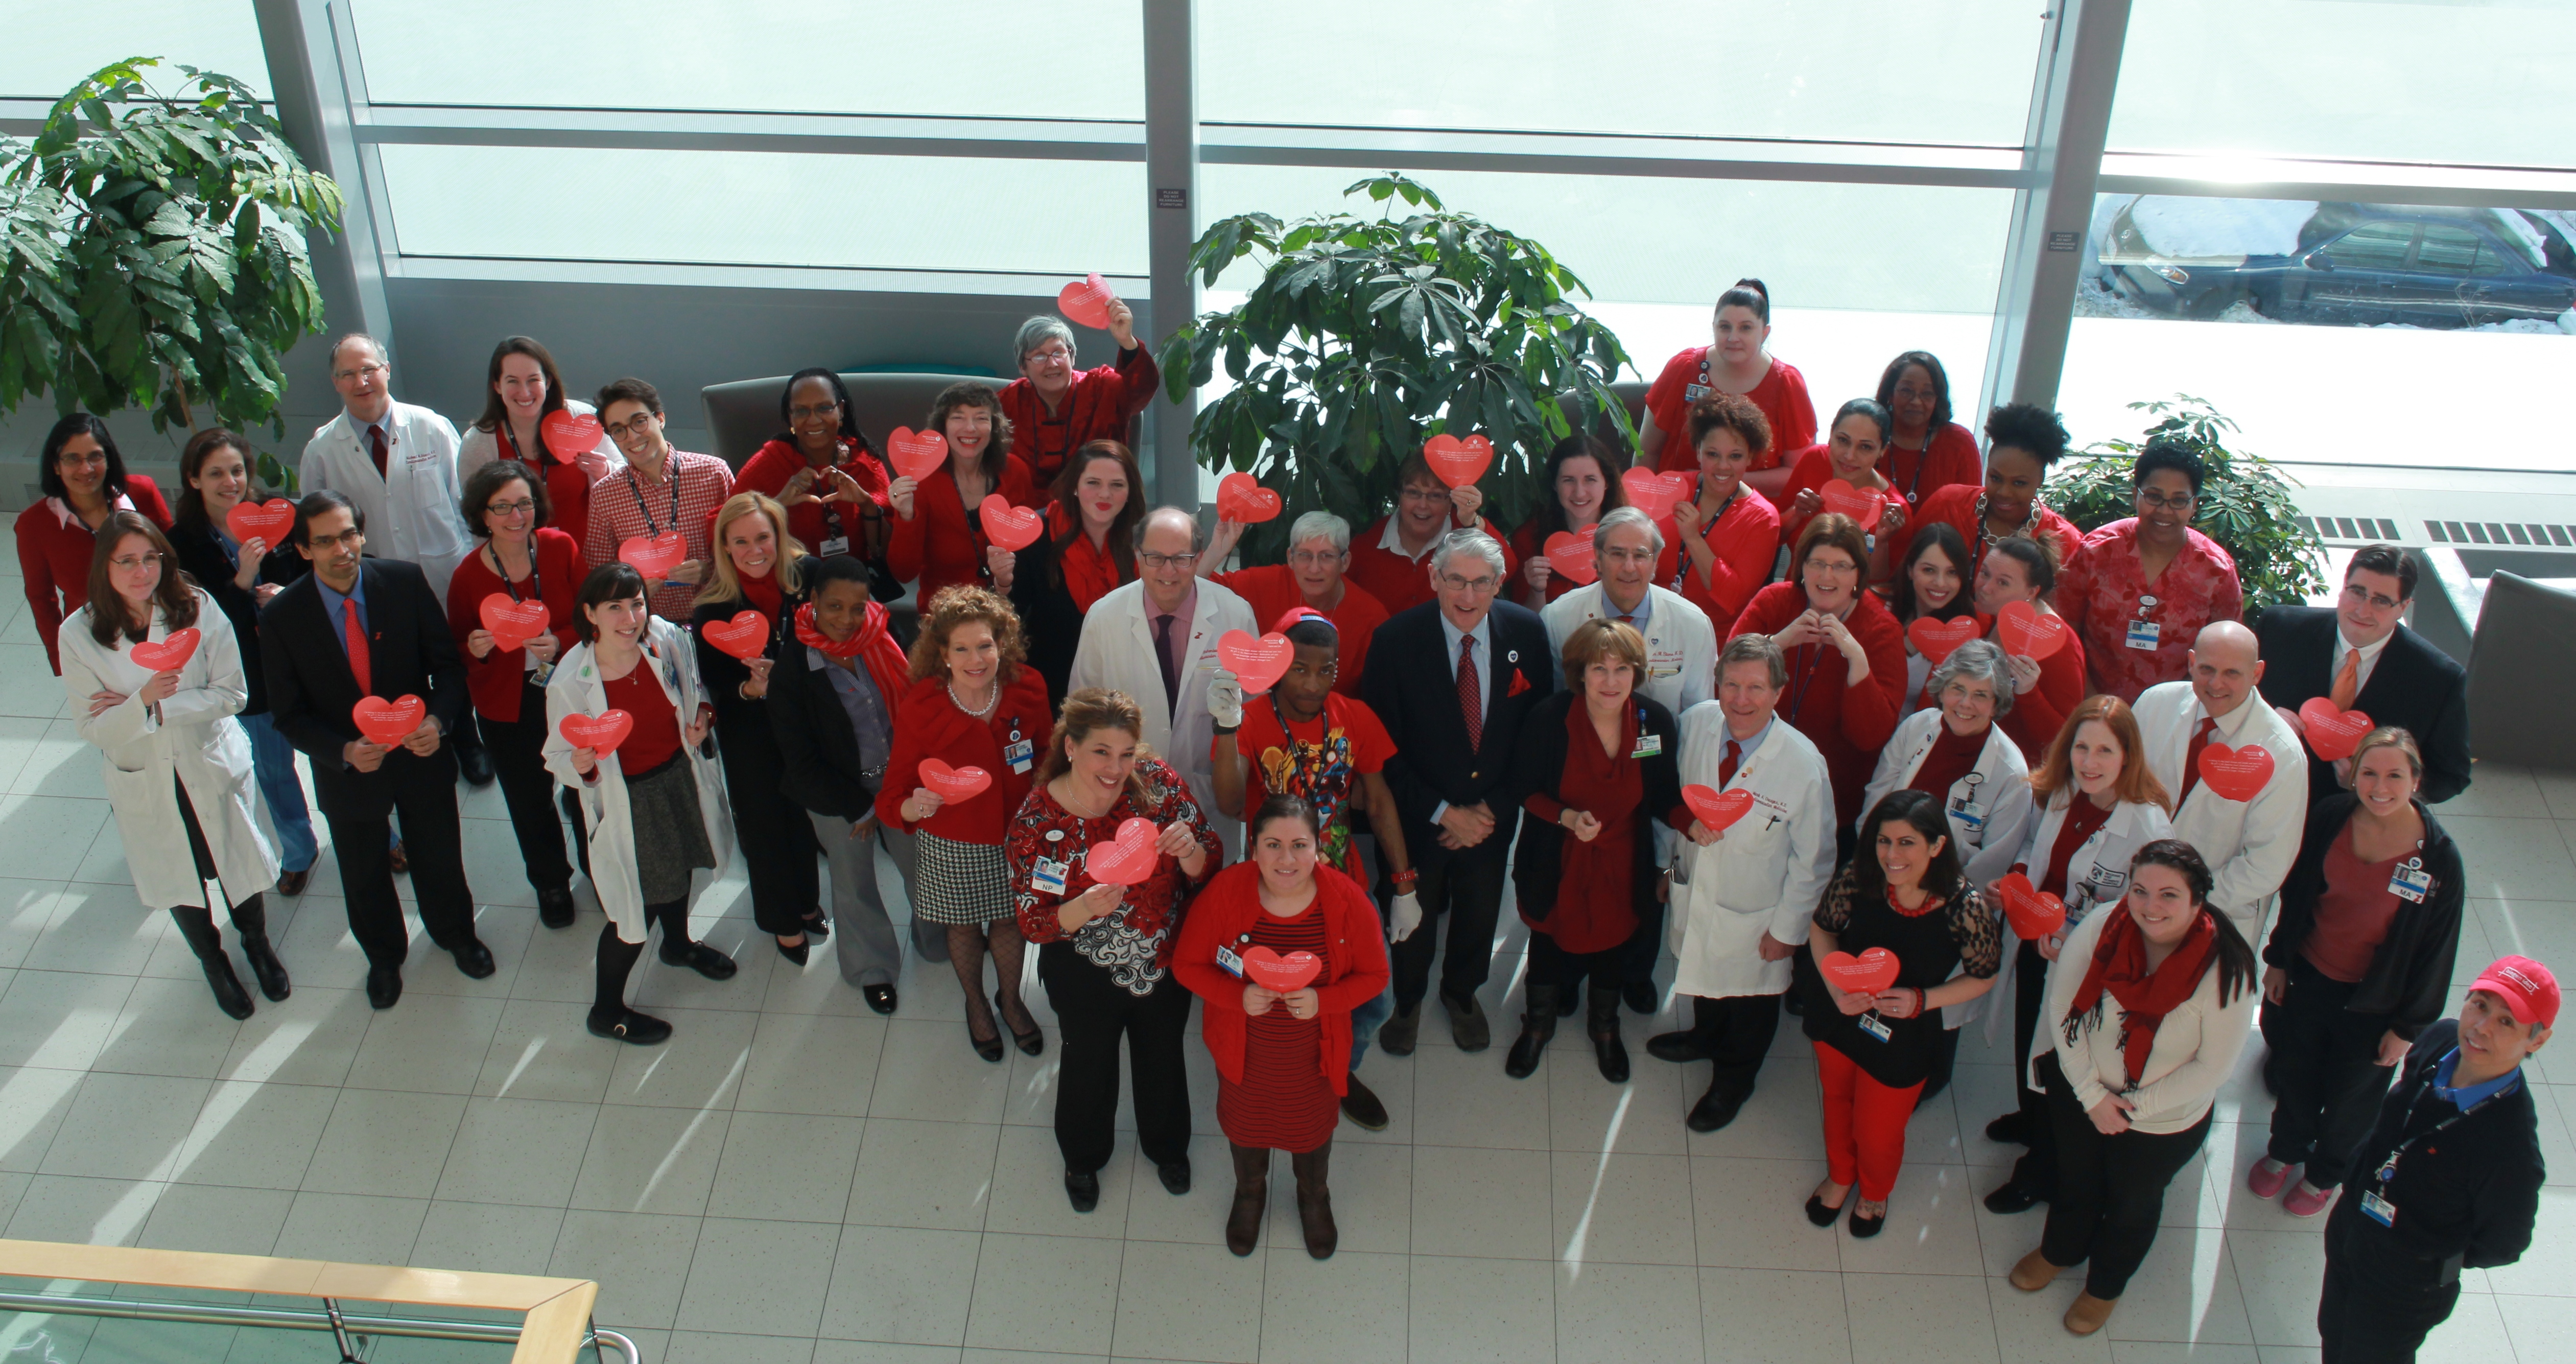 Members of the BWH Heart & Vascular Center pose for a group photo during National Wear Red Day.